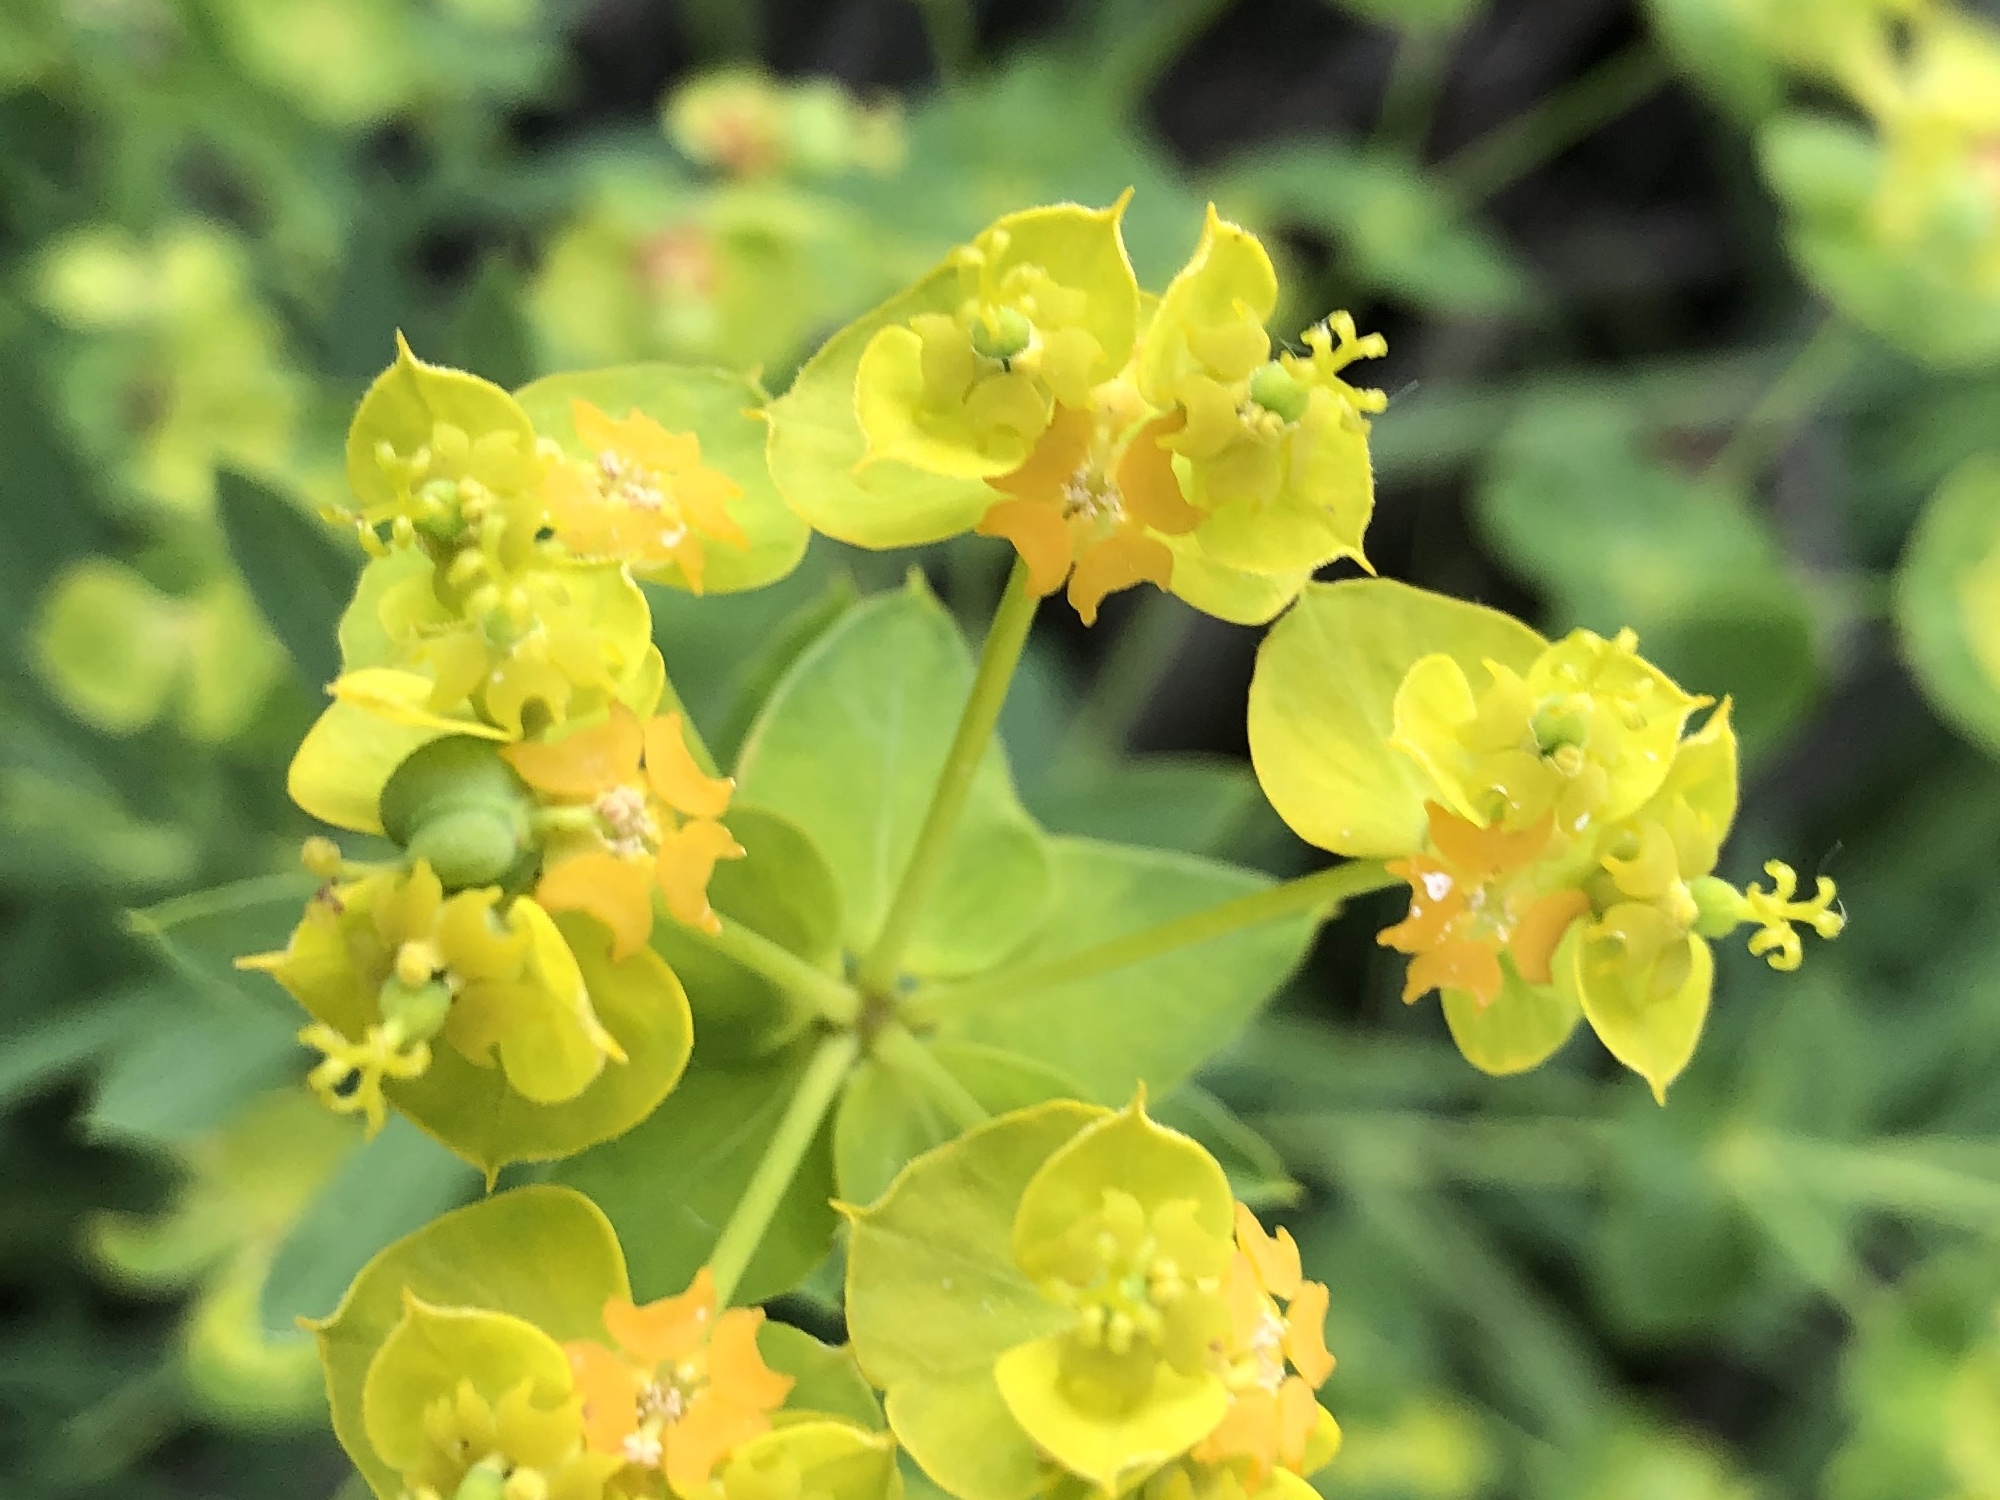 Leafy Spurge around Marion Dunn Pond in Madison, Wisconsin on June 22, 2021.